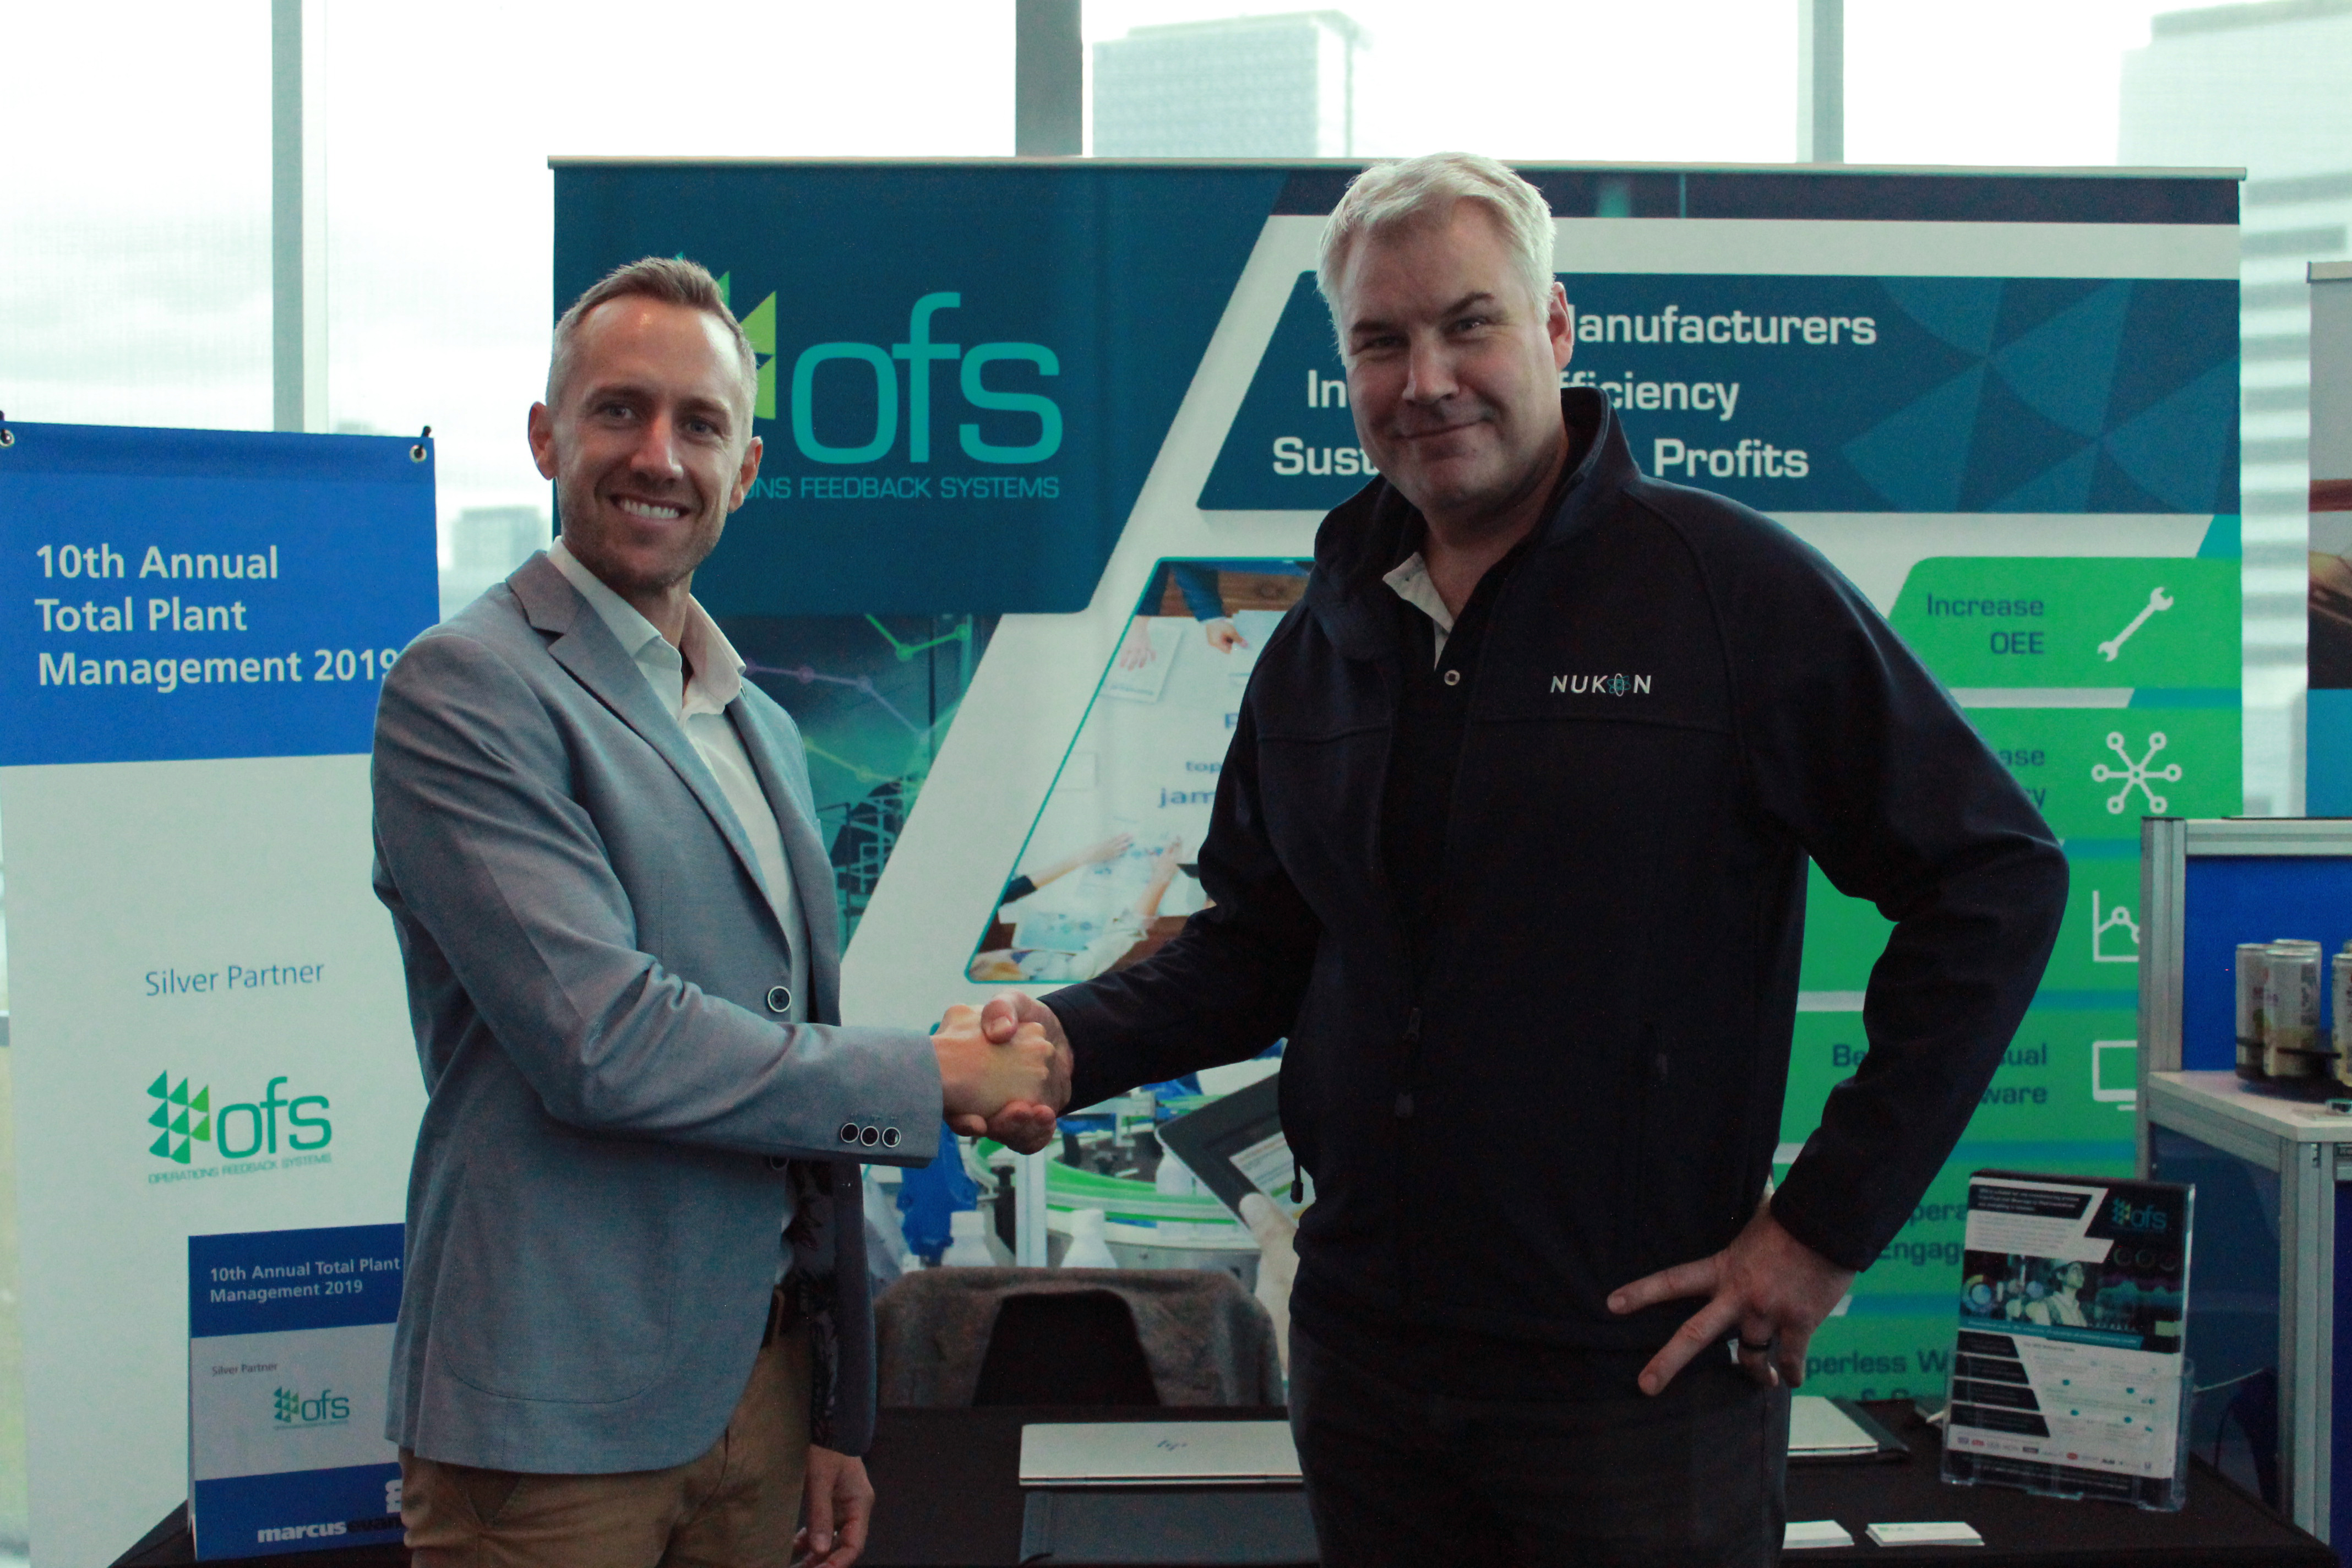 Nukon and OFS partner to offer Australian manufacturers seamless Industry 4.0 solutions